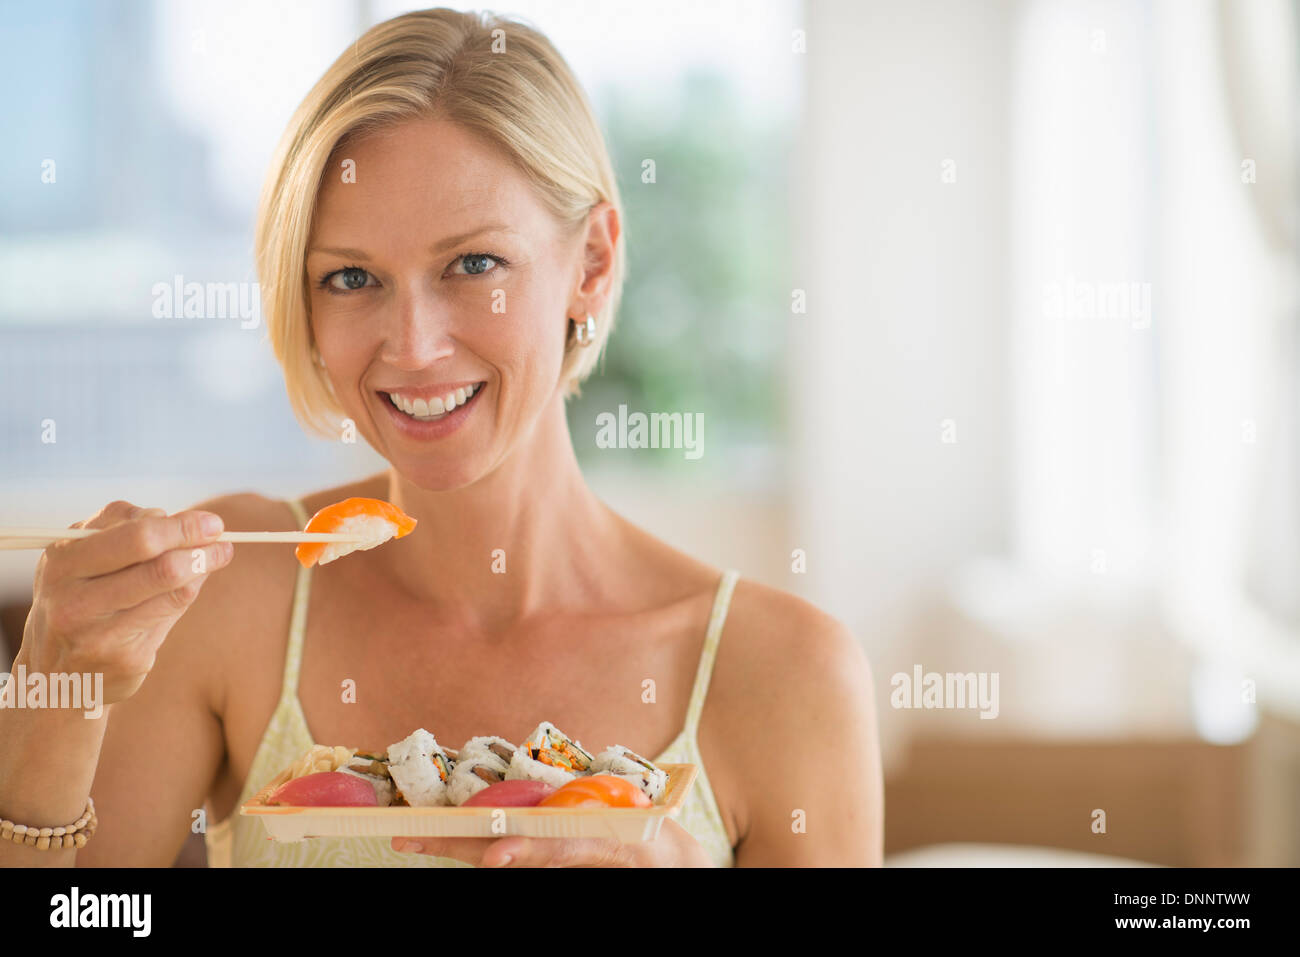 Portrait of woman eating sushi Stock Photo